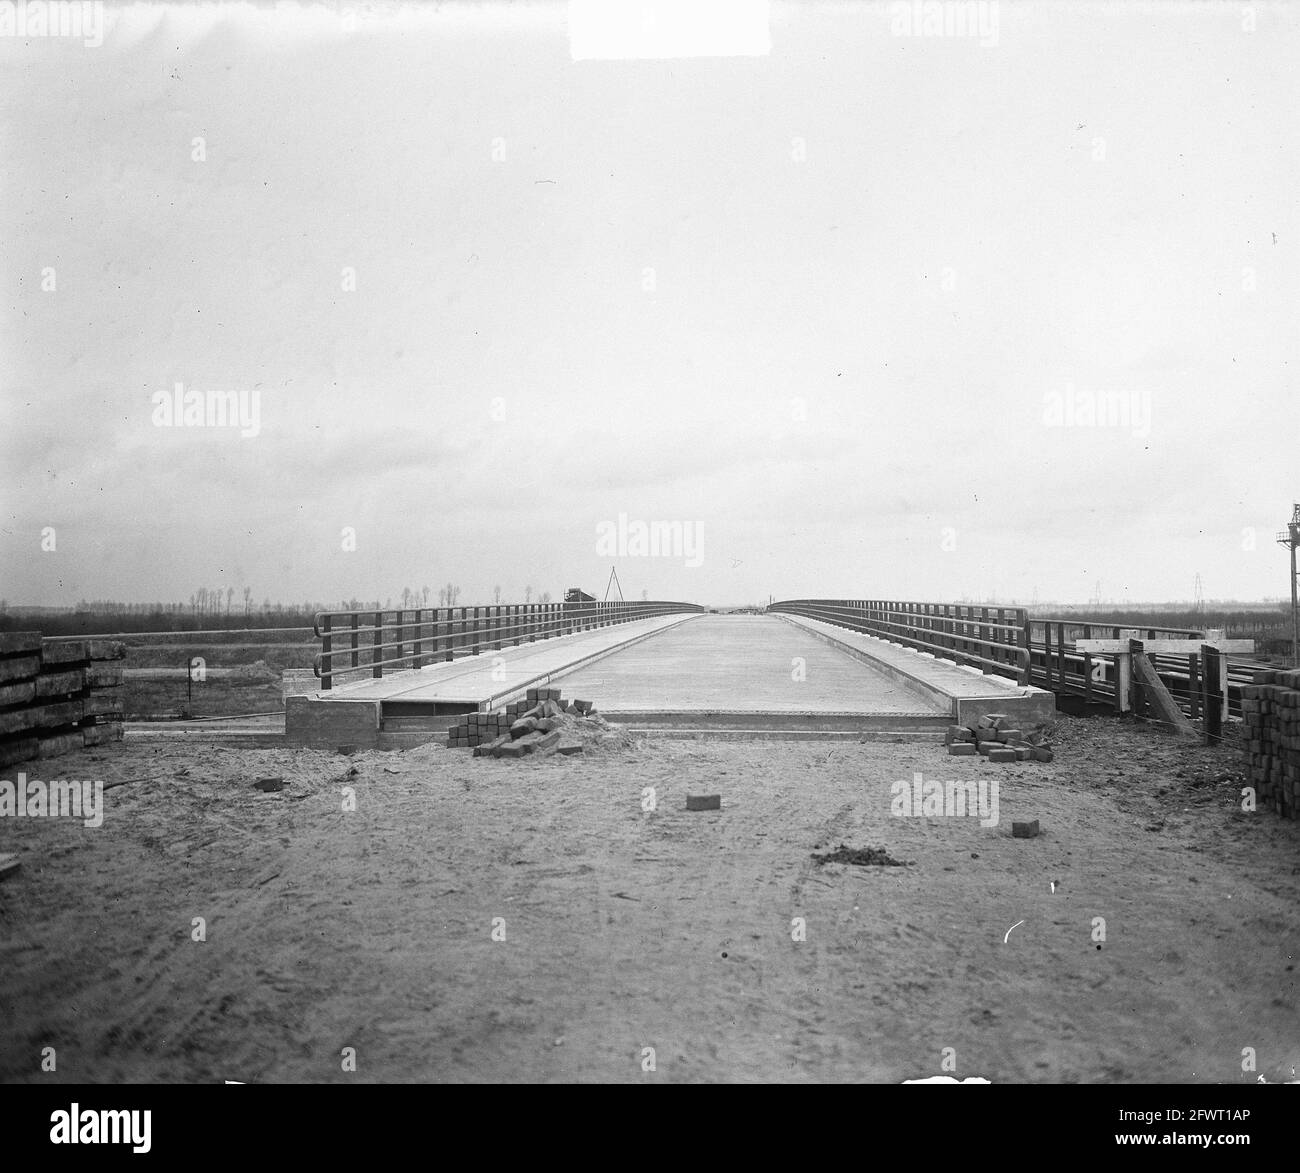 New road bridge over lock at Tiel, 6 January 1950, road bridges, The Netherlands, 20th century press agency photo, news to remember, documentary, historic photography 1945-1990, visual stories, human history of the Twentieth Century, capturing moments in time Stock Photo